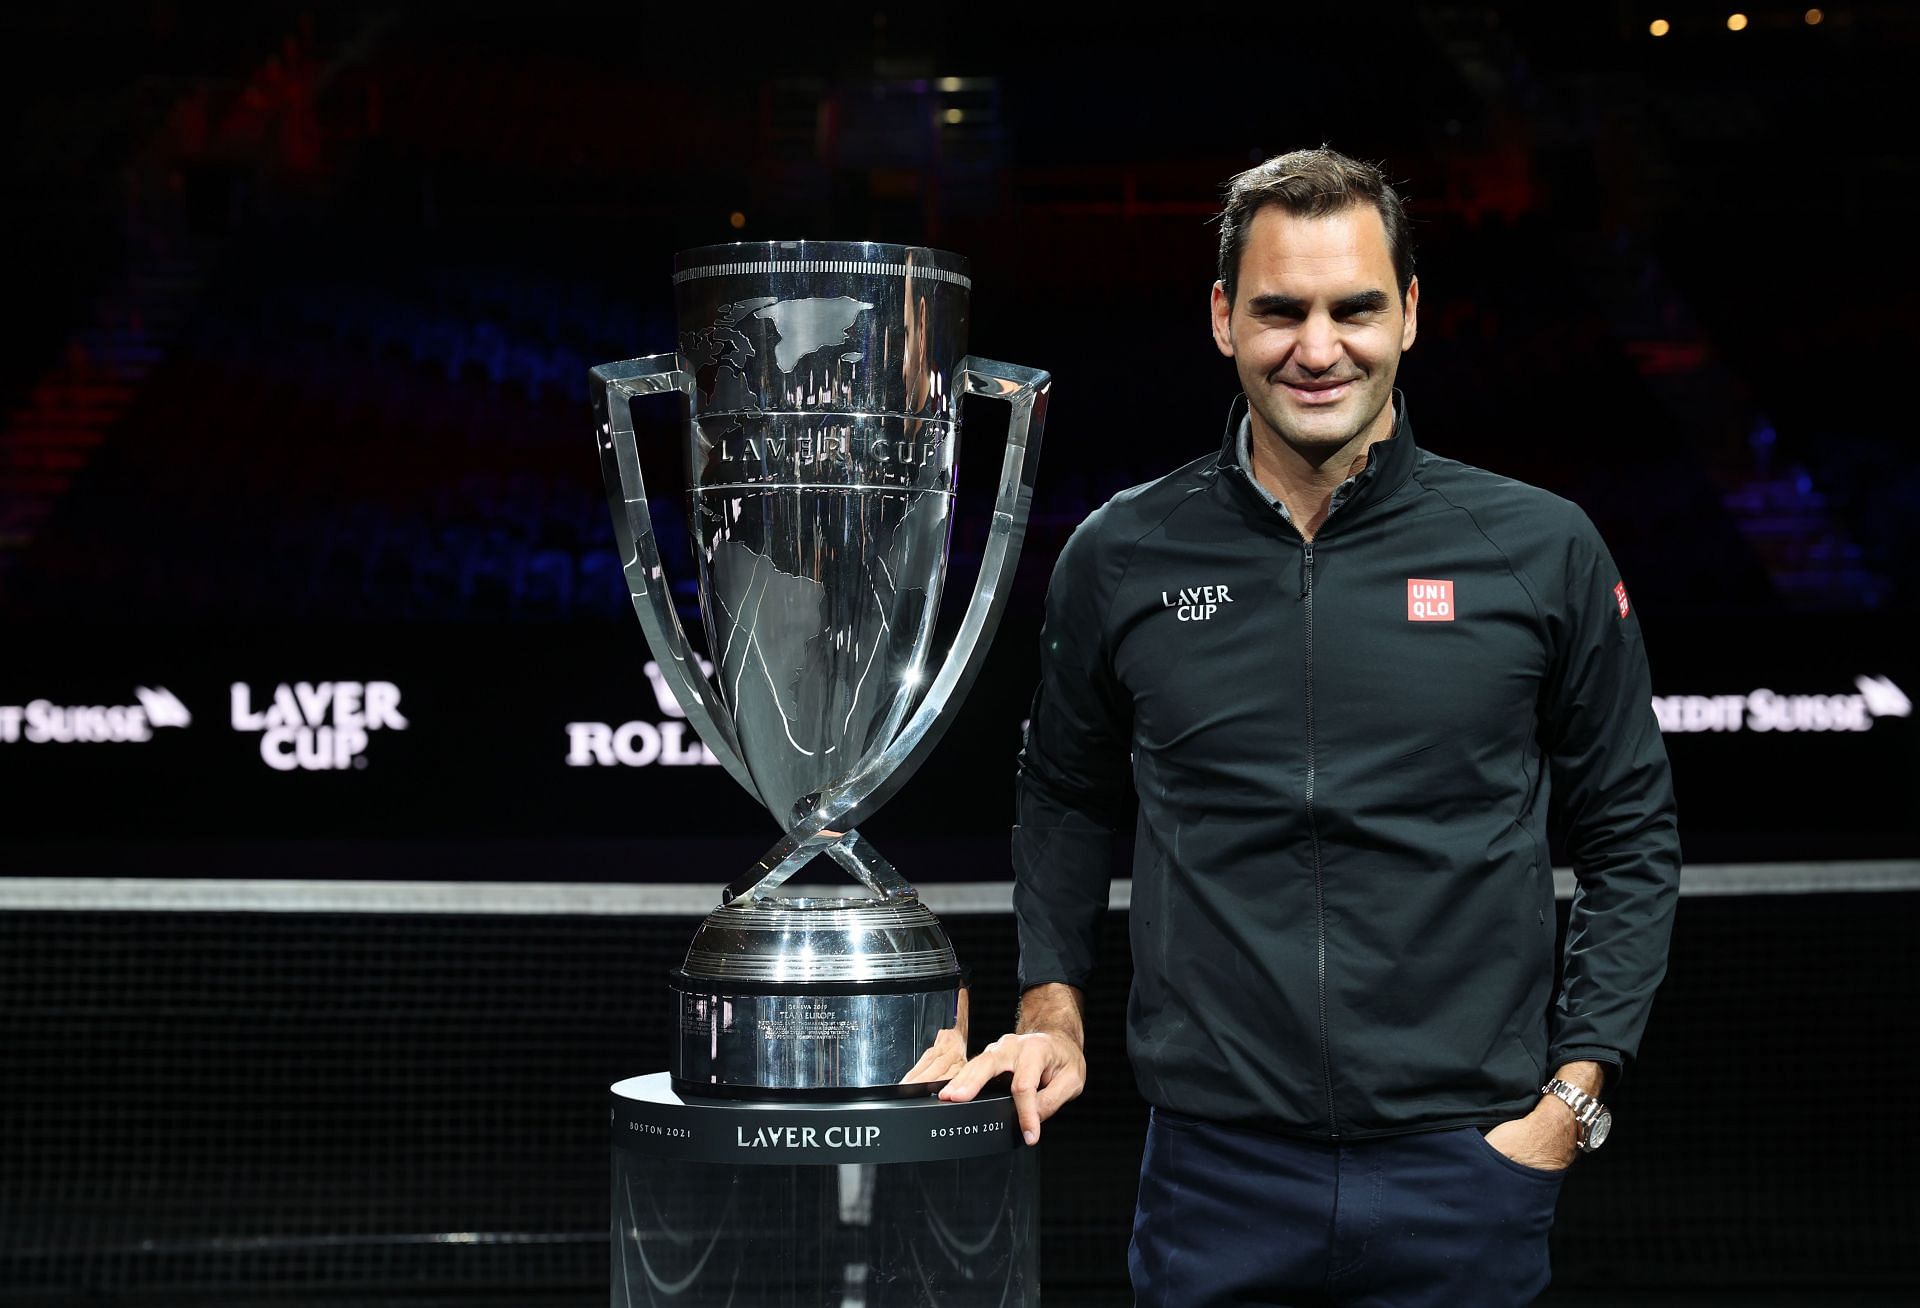 Roger Federer revealed that he intends to play the 2023 season as long as his body cooperates